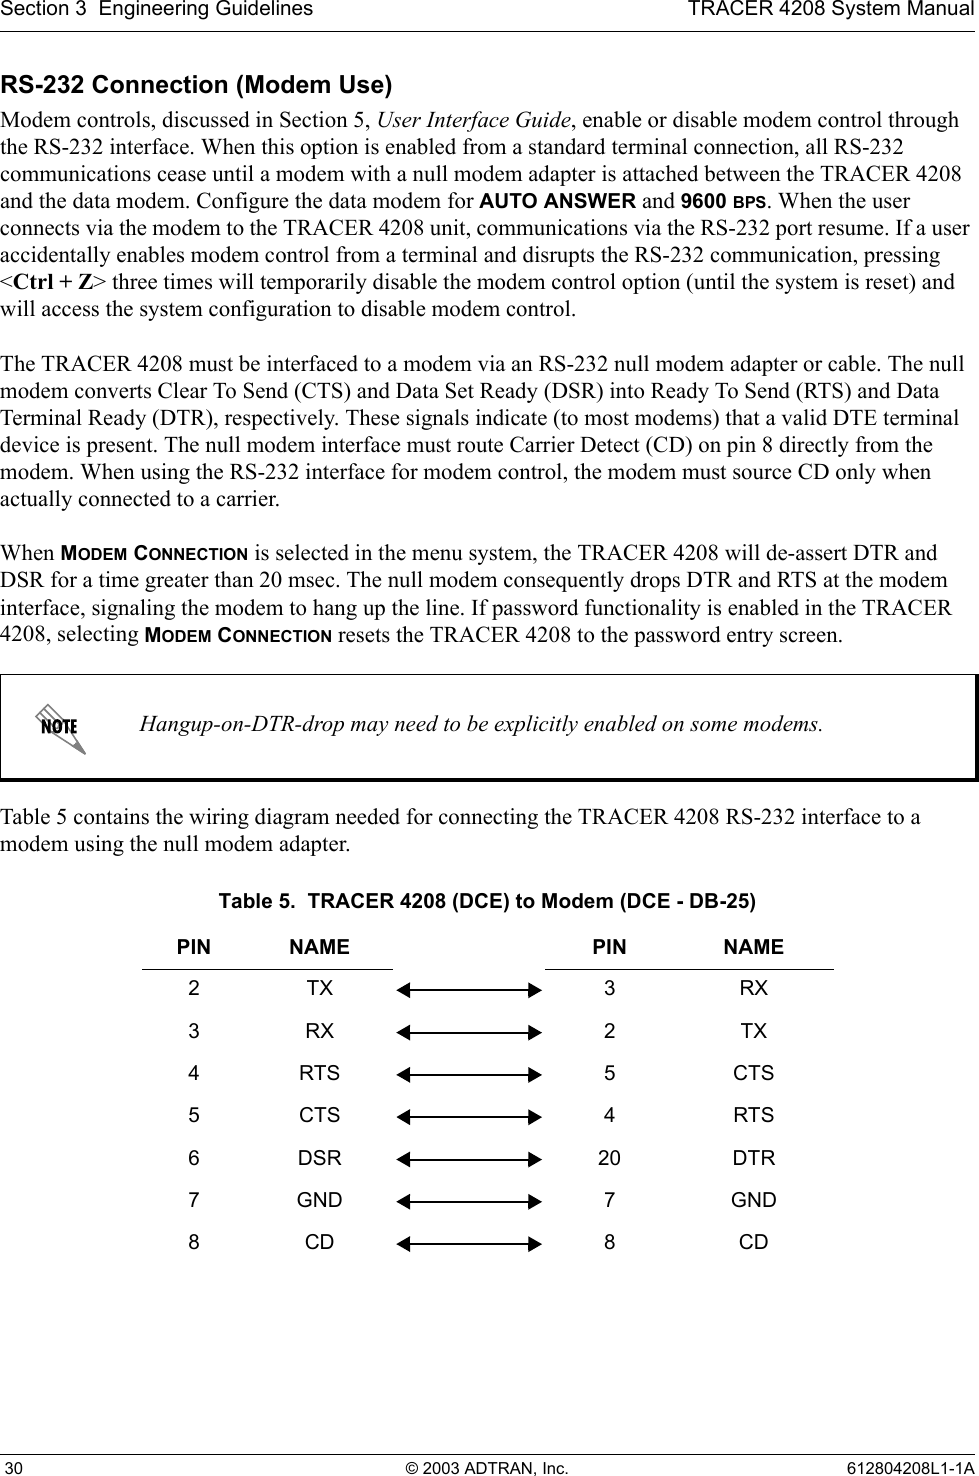 Section 3  Engineering Guidelines TRACER 4208 System Manual 30 © 2003 ADTRAN, Inc. 612804208L1-1ARS-232 Connection (Modem Use)Modem controls, discussed in Section 5, User Interface Guide, enable or disable modem control through the RS-232 interface. When this option is enabled from a standard terminal connection, all RS-232 communications cease until a modem with a null modem adapter is attached between the TRACER 4208 and the data modem. Configure the data modem for AUTO ANSWER and 9600 BPS. When the user connects via the modem to the TRACER 4208 unit, communications via the RS-232 port resume. If a user accidentally enables modem control from a terminal and disrupts the RS-232 communication, pressing &lt;Ctrl + Z&gt; three times will temporarily disable the modem control option (until the system is reset) and will access the system configuration to disable modem control.The TRACER 4208 must be interfaced to a modem via an RS-232 null modem adapter or cable. The null modem converts Clear To Send (CTS) and Data Set Ready (DSR) into Ready To Send (RTS) and Data Terminal Ready (DTR), respectively. These signals indicate (to most modems) that a valid DTE terminal device is present. The null modem interface must route Carrier Detect (CD) on pin 8 directly from the modem. When using the RS-232 interface for modem control, the modem must source CD only when actually connected to a carrier.When MODEM CONNECTION is selected in the menu system, the TRACER 4208 will de-assert DTR and DSR for a time greater than 20 msec. The null modem consequently drops DTR and RTS at the modem interface, signaling the modem to hang up the line. If password functionality is enabled in the TRACER 4208, selecting MODEM CONNECTION resets the TRACER 4208 to the password entry screen.Table 5 contains the wiring diagram needed for connecting the TRACER 4208 RS-232 interface to a modem using the null modem adapter.Hangup-on-DTR-drop may need to be explicitly enabled on some modems.Table 5.  TRACER 4208 (DCE) to Modem (DCE - DB-25)PIN NAME PIN NAME2TX 3RX3RX 2TX4RTS 5CTS5CTS 4RTS6DSR 20 DTR7GND 7 GND8CD 8CD